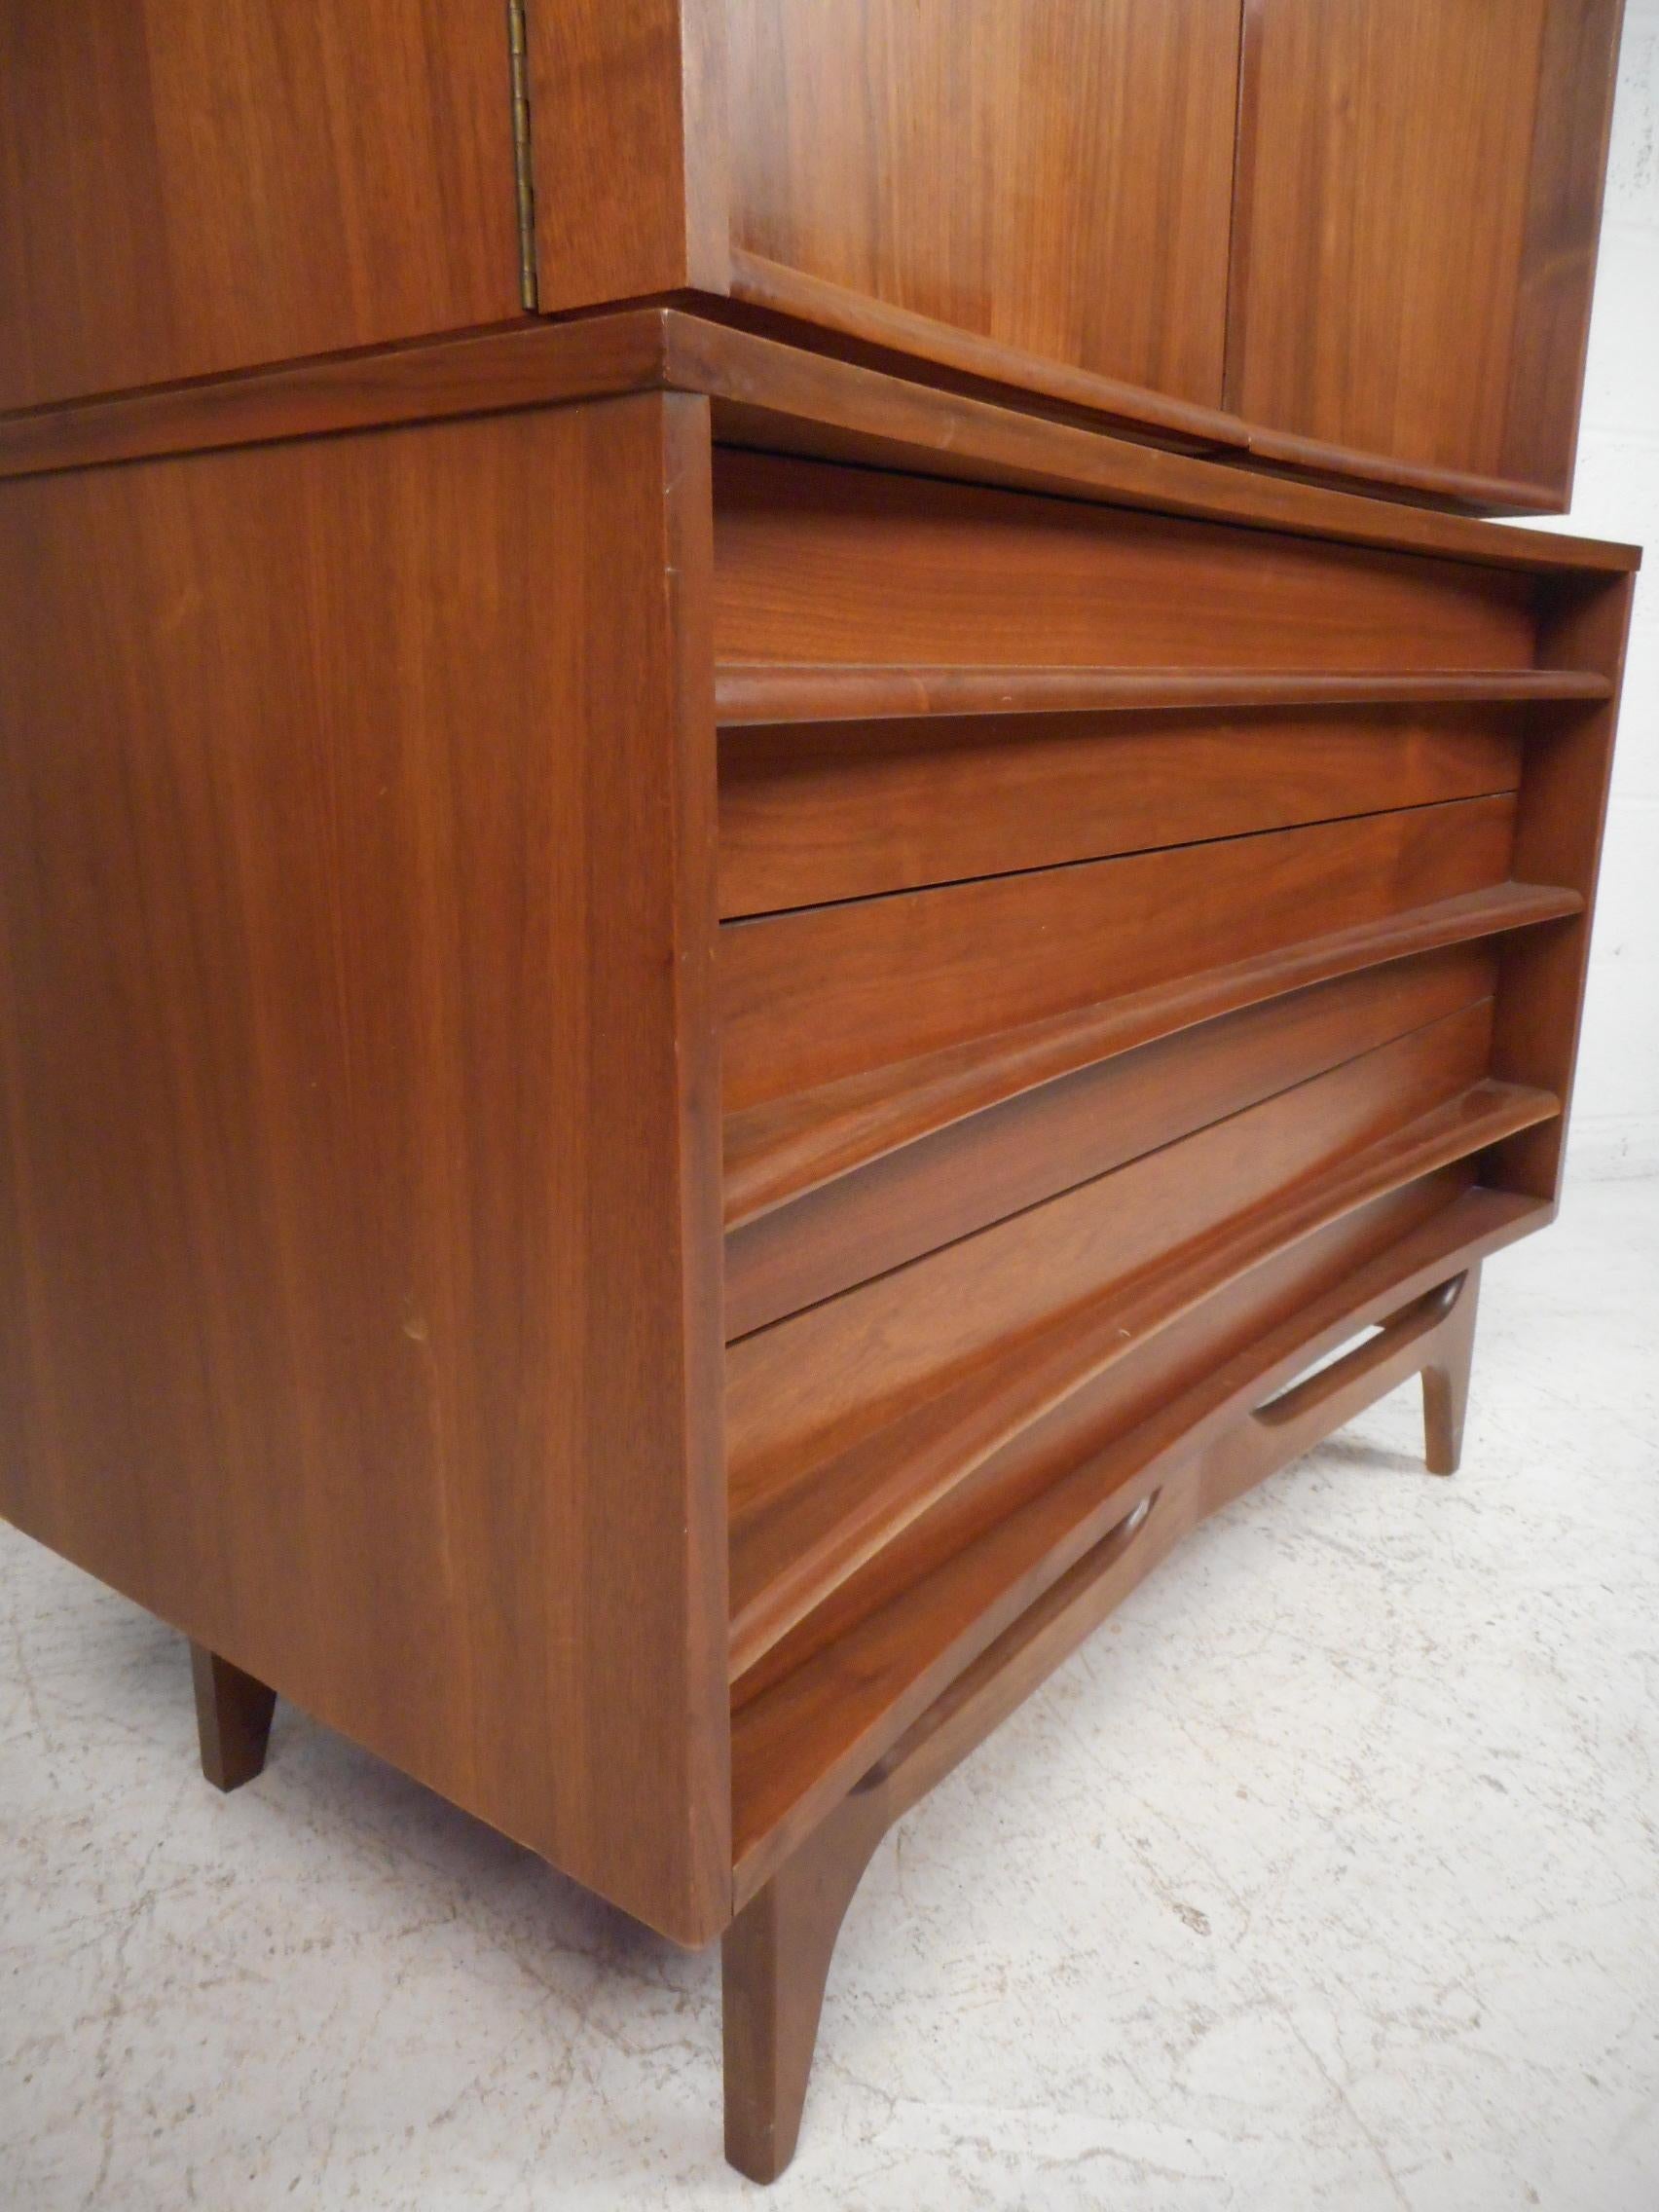 20th Century Mid-Century Modern Highboy Dresser with Curved Drawer-Fronts